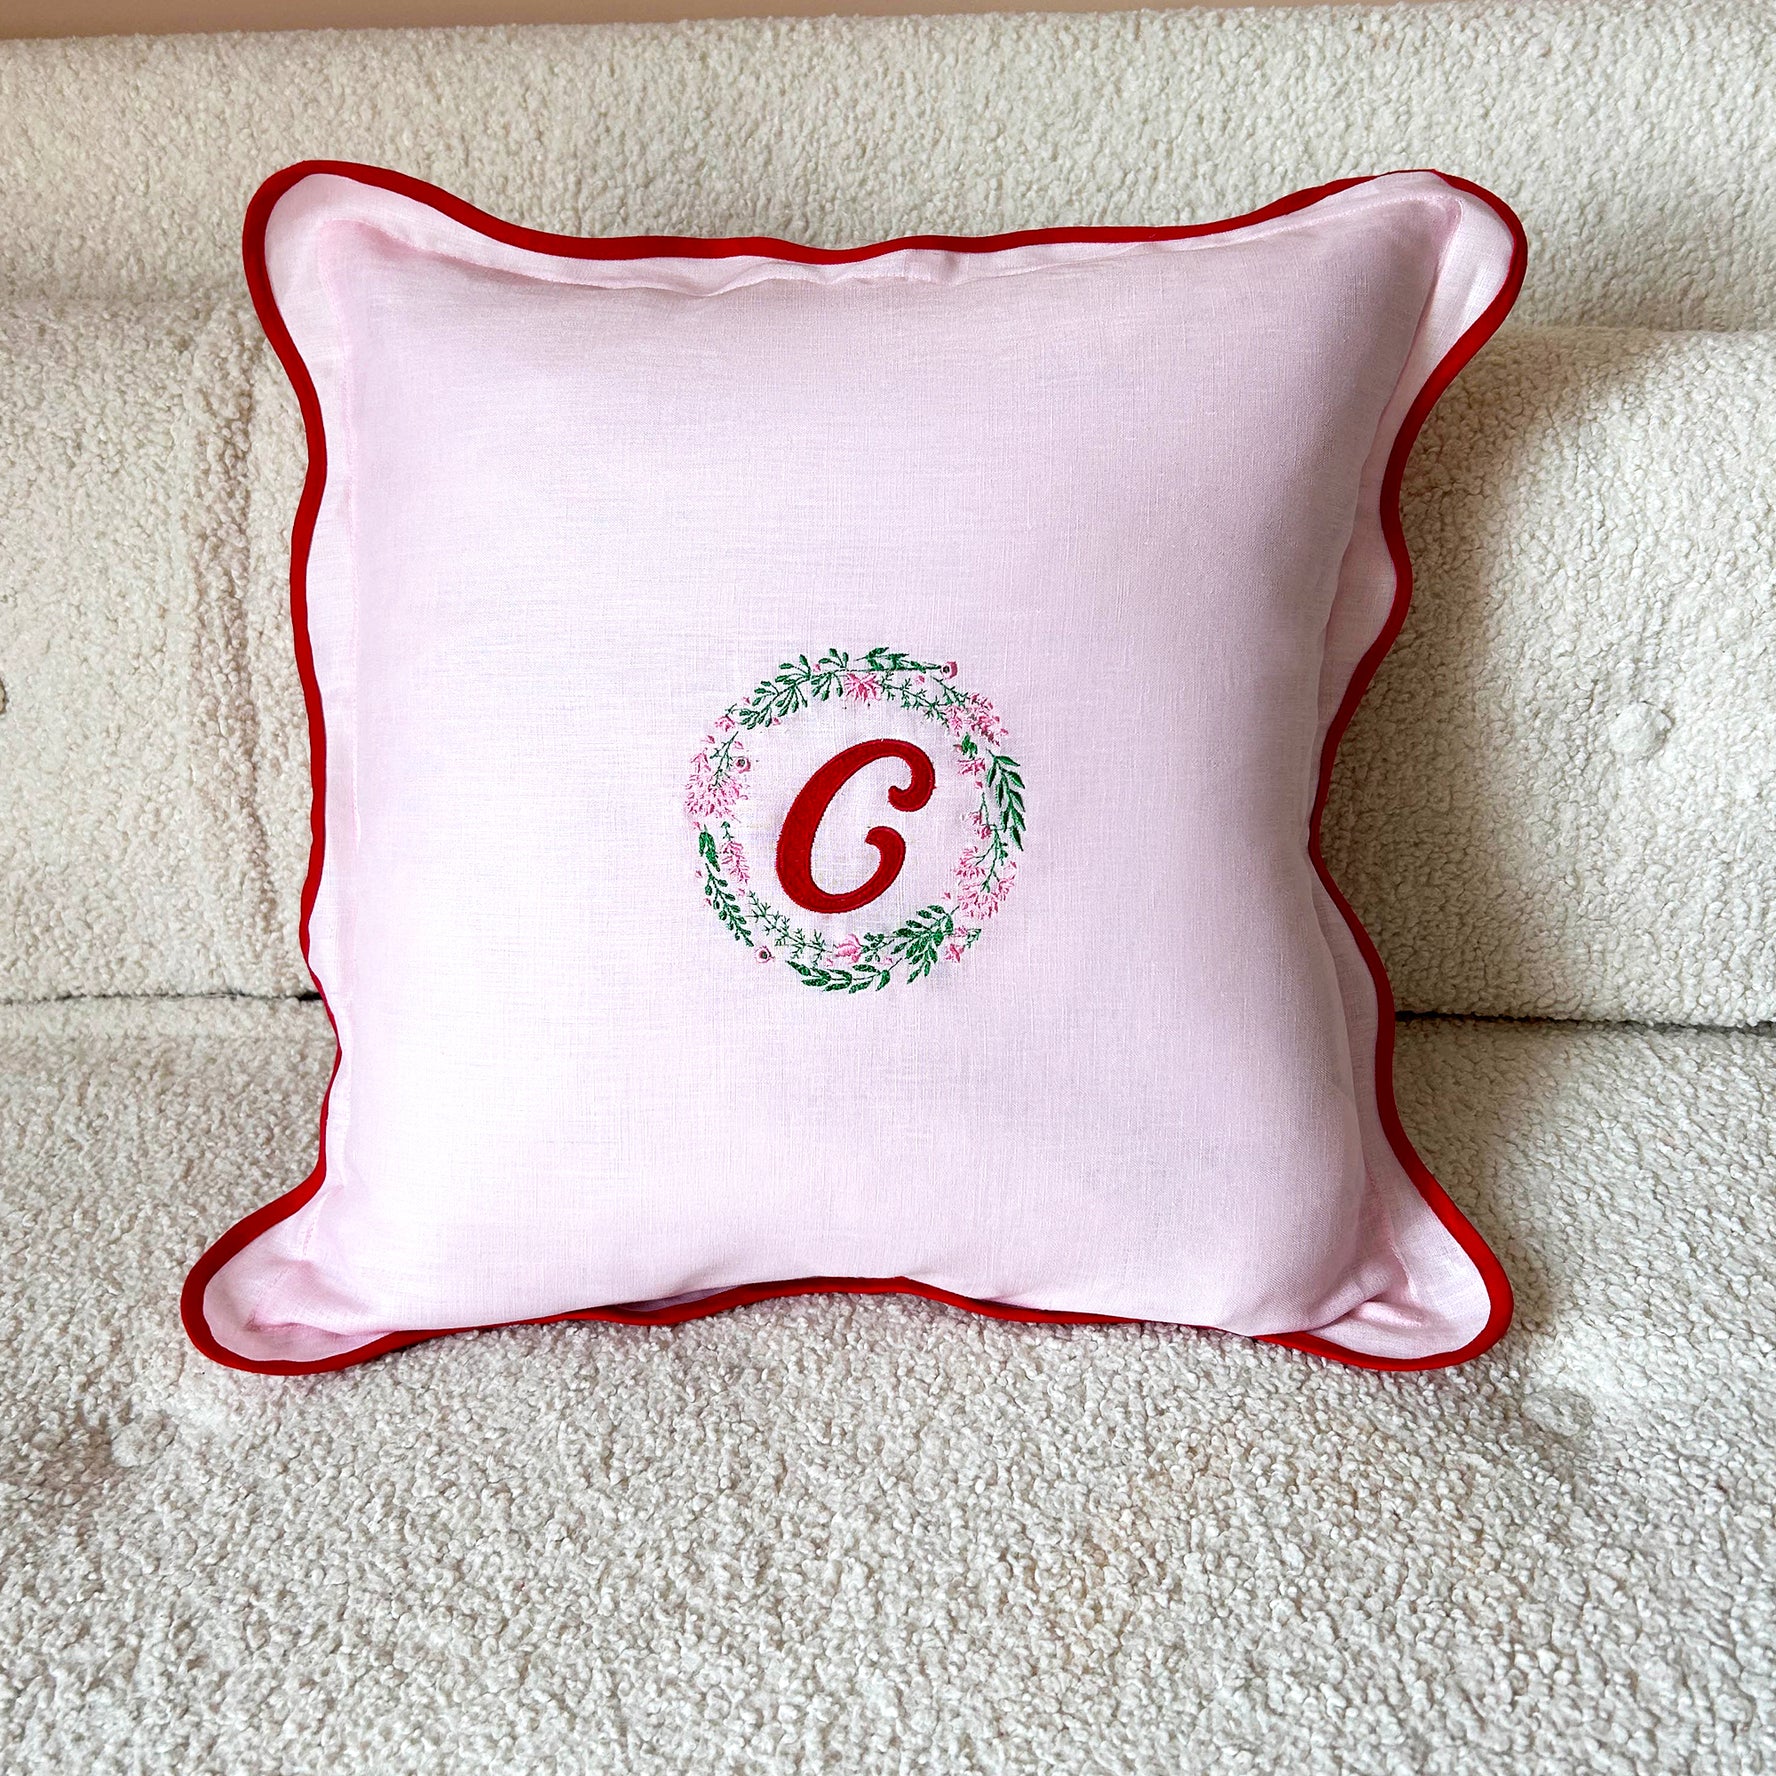 Red & Pink Scalloped Linen Embroidered Pillow - Floral Monograme